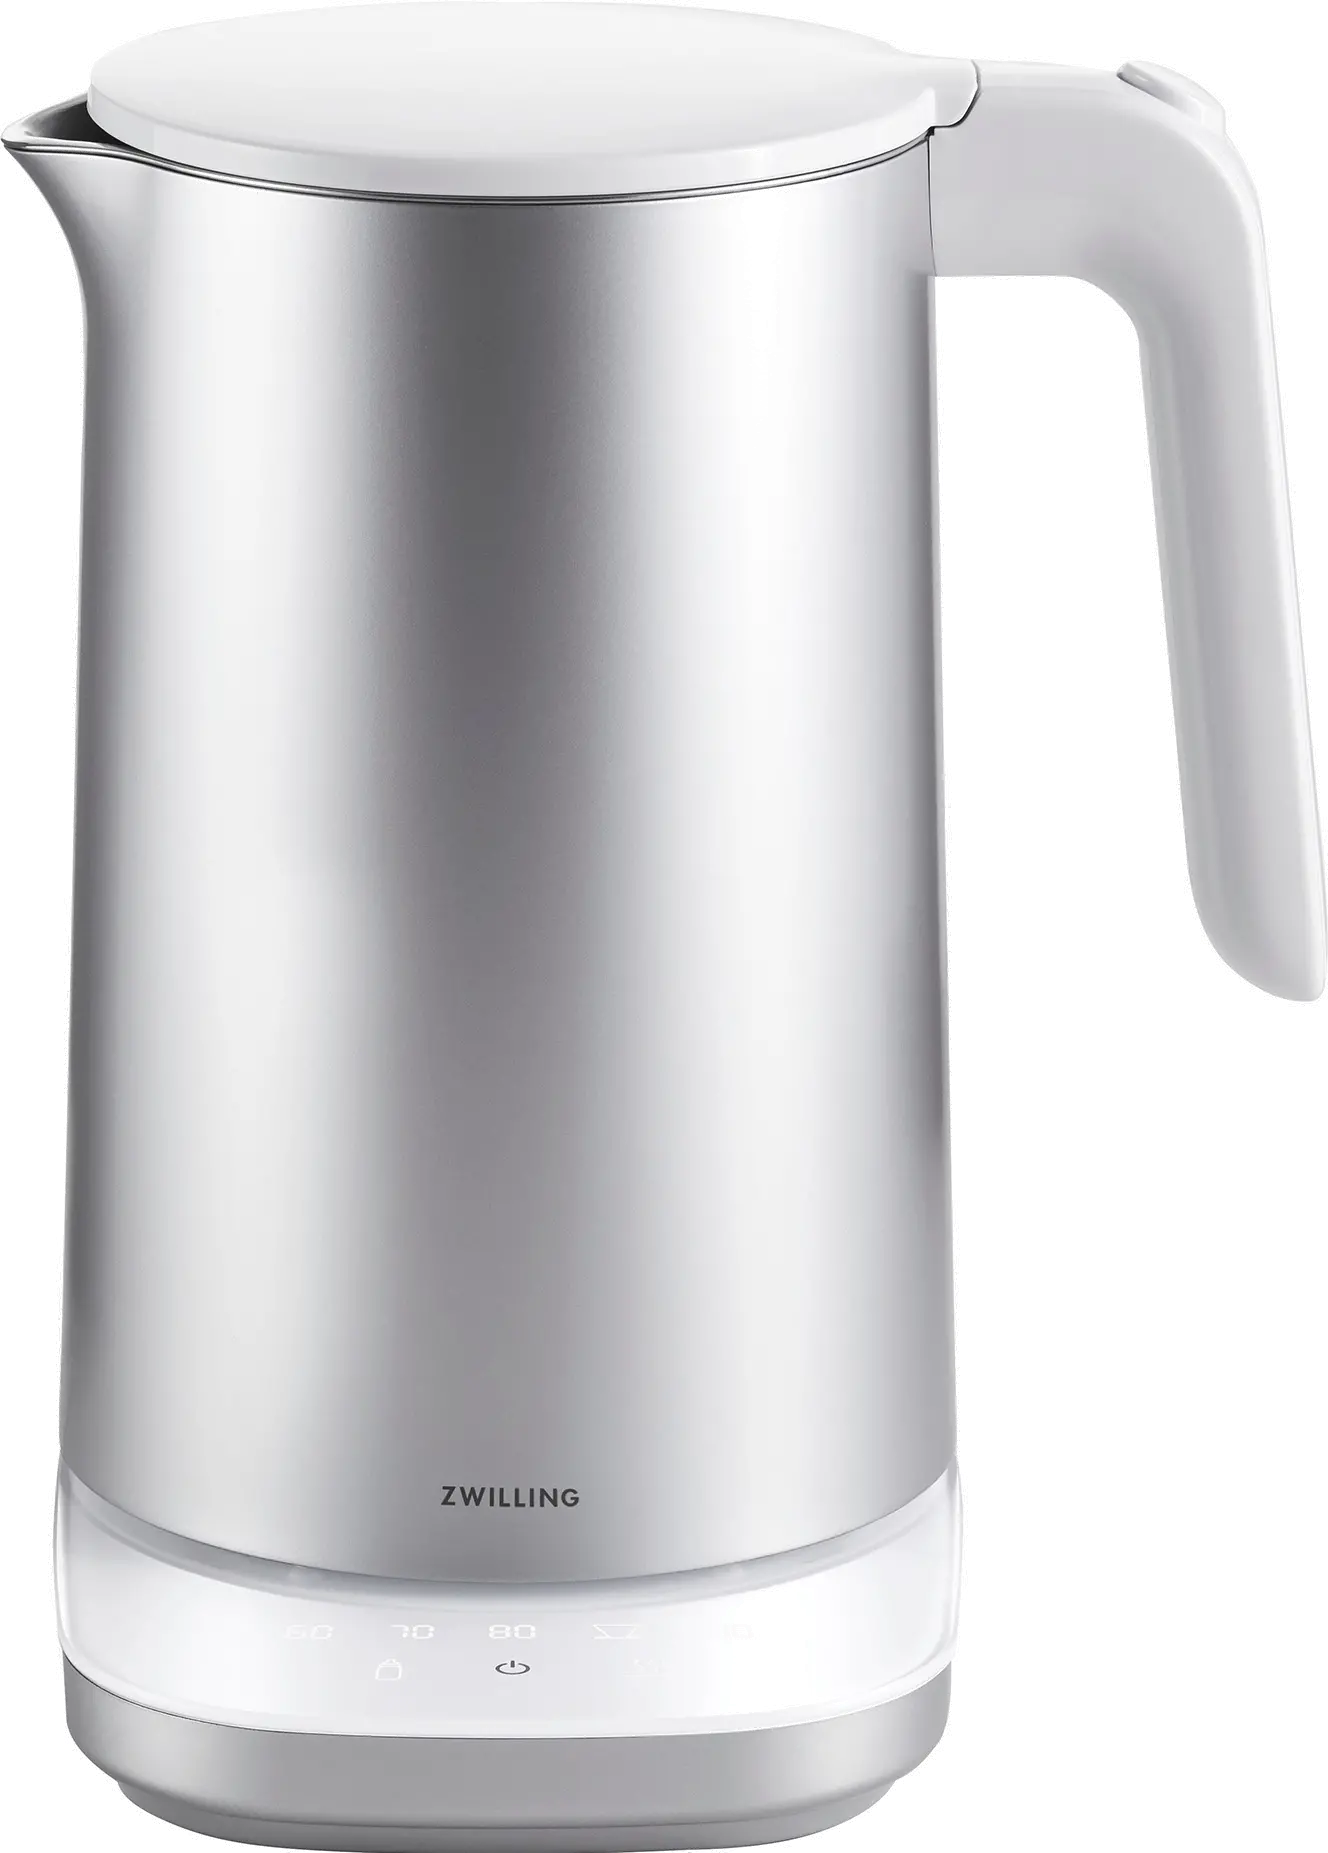 https://static.rcwilley.com/products/112935249/Zwilling-Enfinigy-1.56-qt-Cool-Touch-Stainless-Steel-Electric-Kettle---Silver-rcwilley-image1.webp